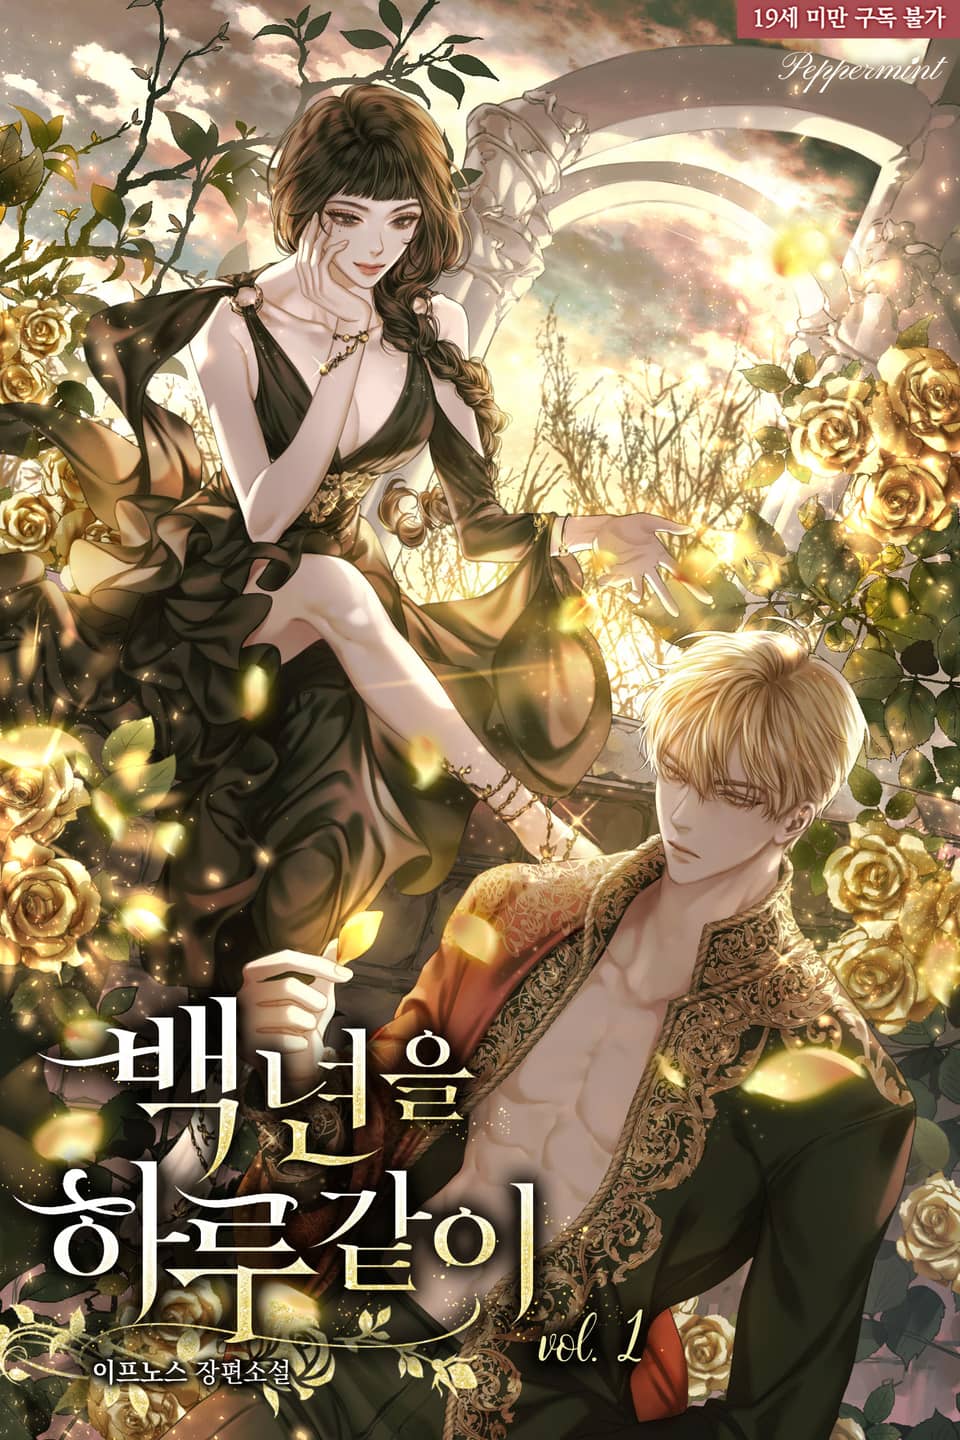 The Max Level Players 100th Regression] Just started reading, and love the  sibling relationship : r/manhwa